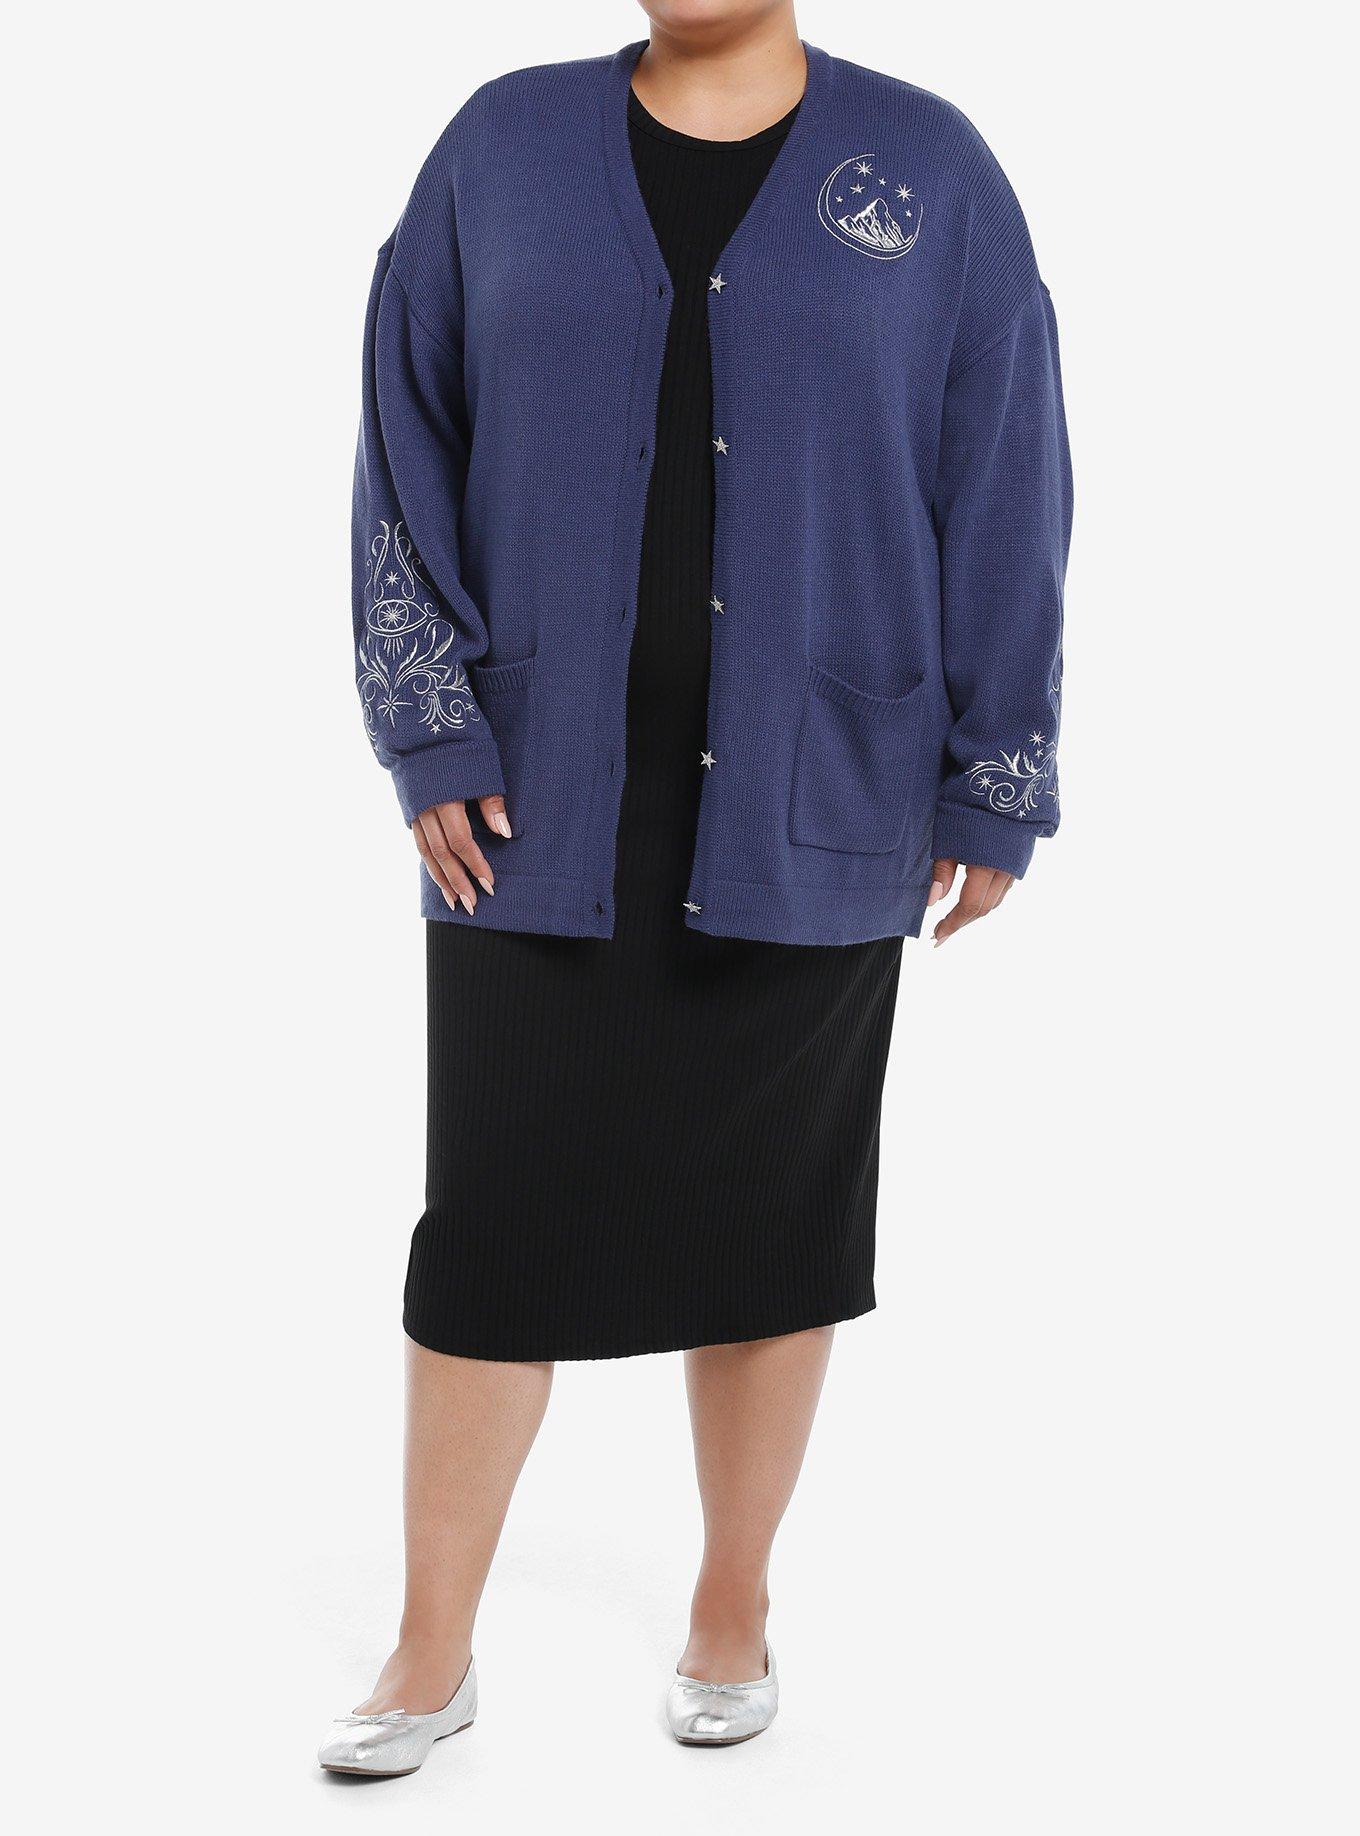 A Court Of Thorns And Roses Night Court Star Cardigan Plus Size, NAVY, alternate